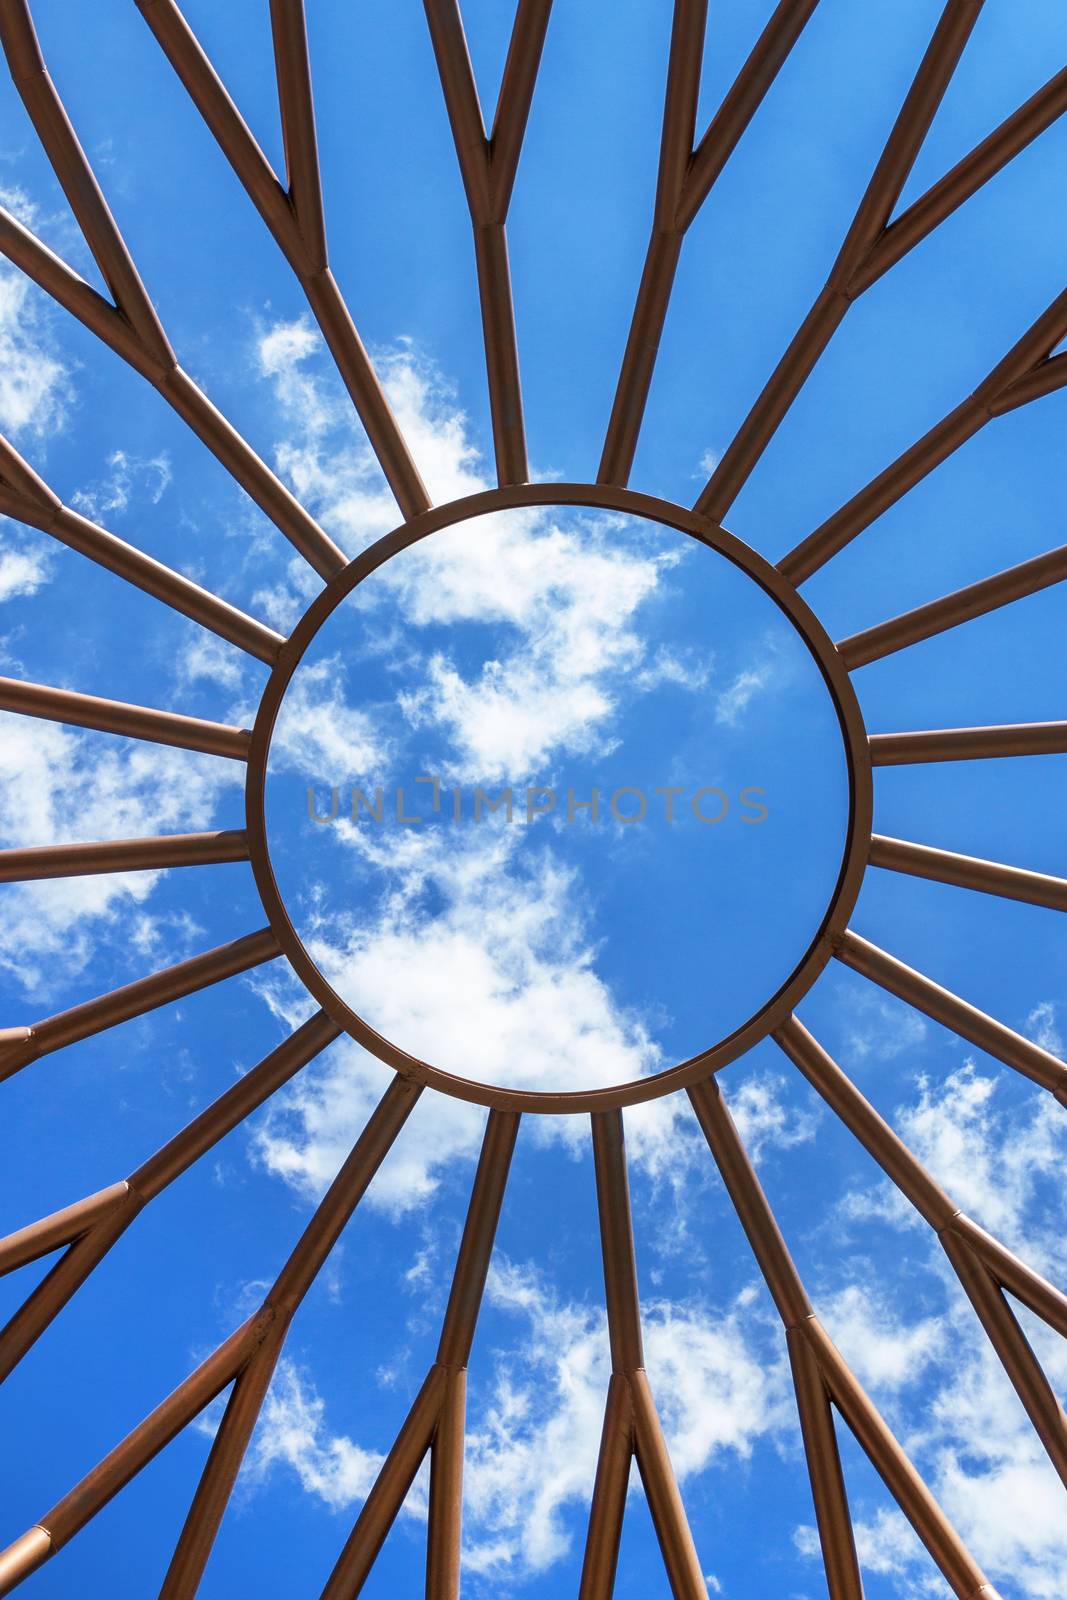 Steel structure architecture detail. Sunny shape with steel rays. Abstract background with nice sky and clouds.